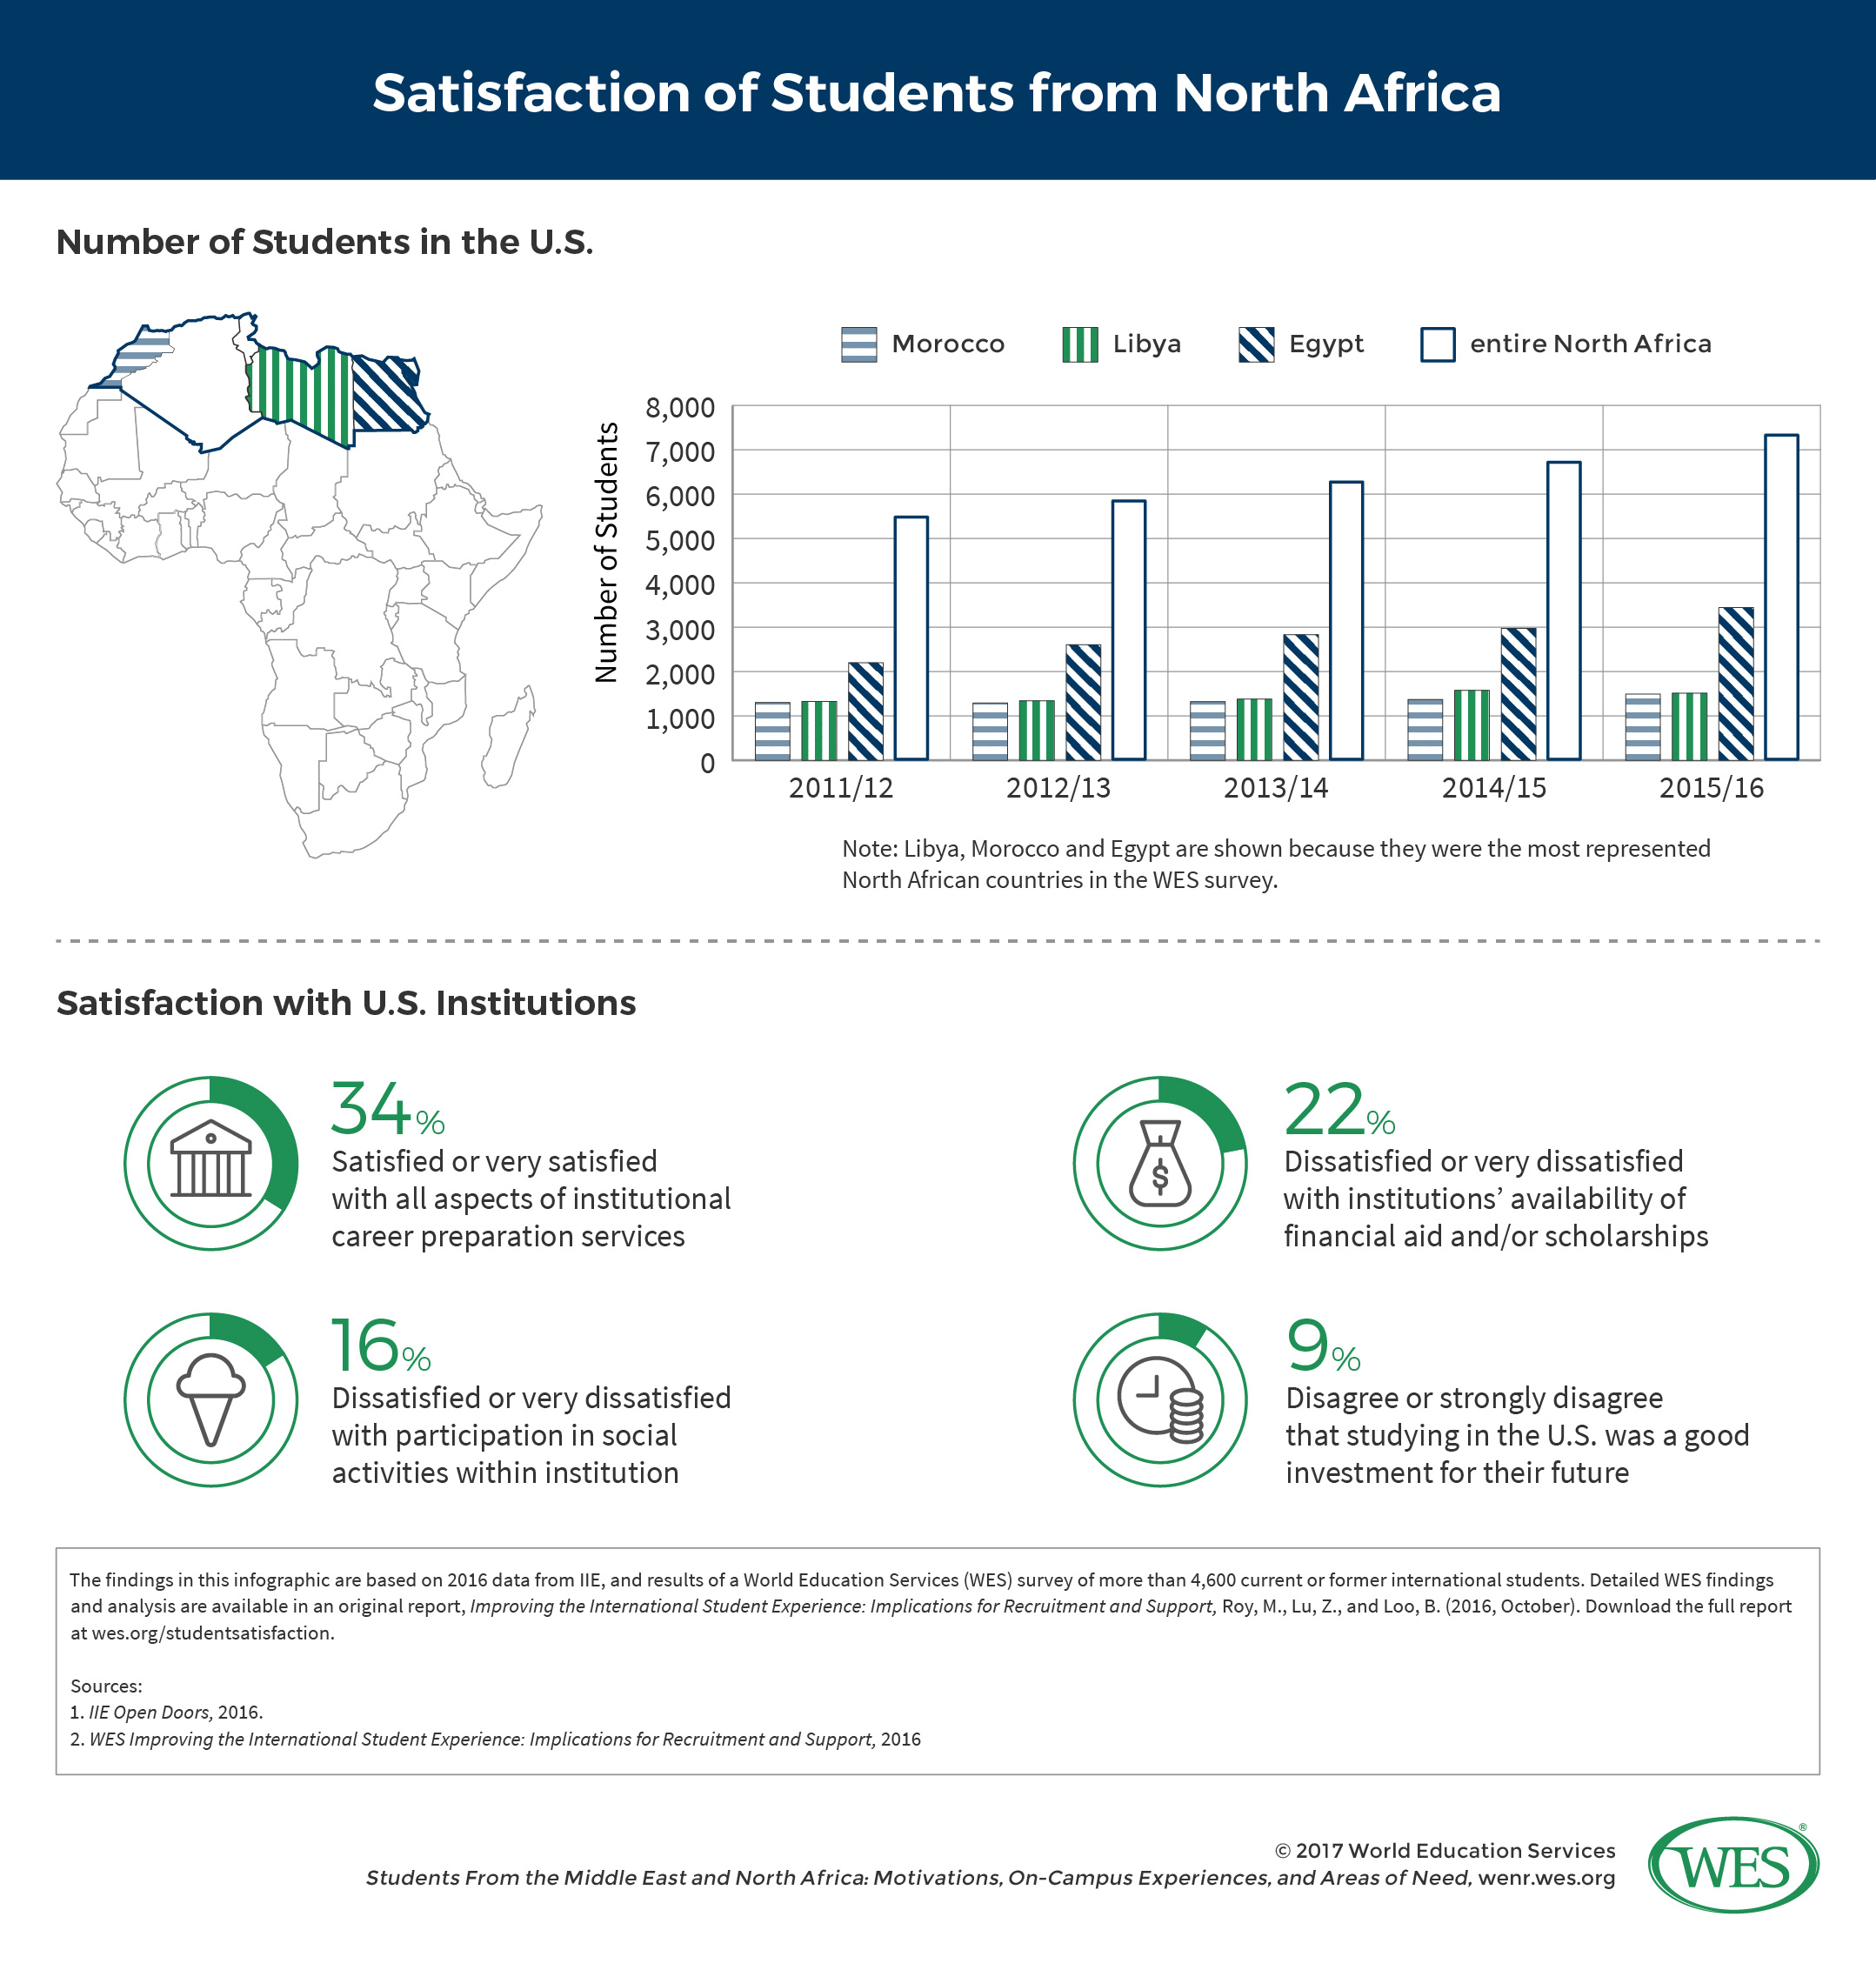 Infographic on students from North Africa in the United States. In the top half, a map of North Africa and a bar graph show the number of students from Morocco, Libya, Egypt, and the entire North African region, from 2011 to 2016. In the bottom half, icons accompany data on students' satisfaction with career-preparation services, social activities, availability of financial aid, and investment for the future.